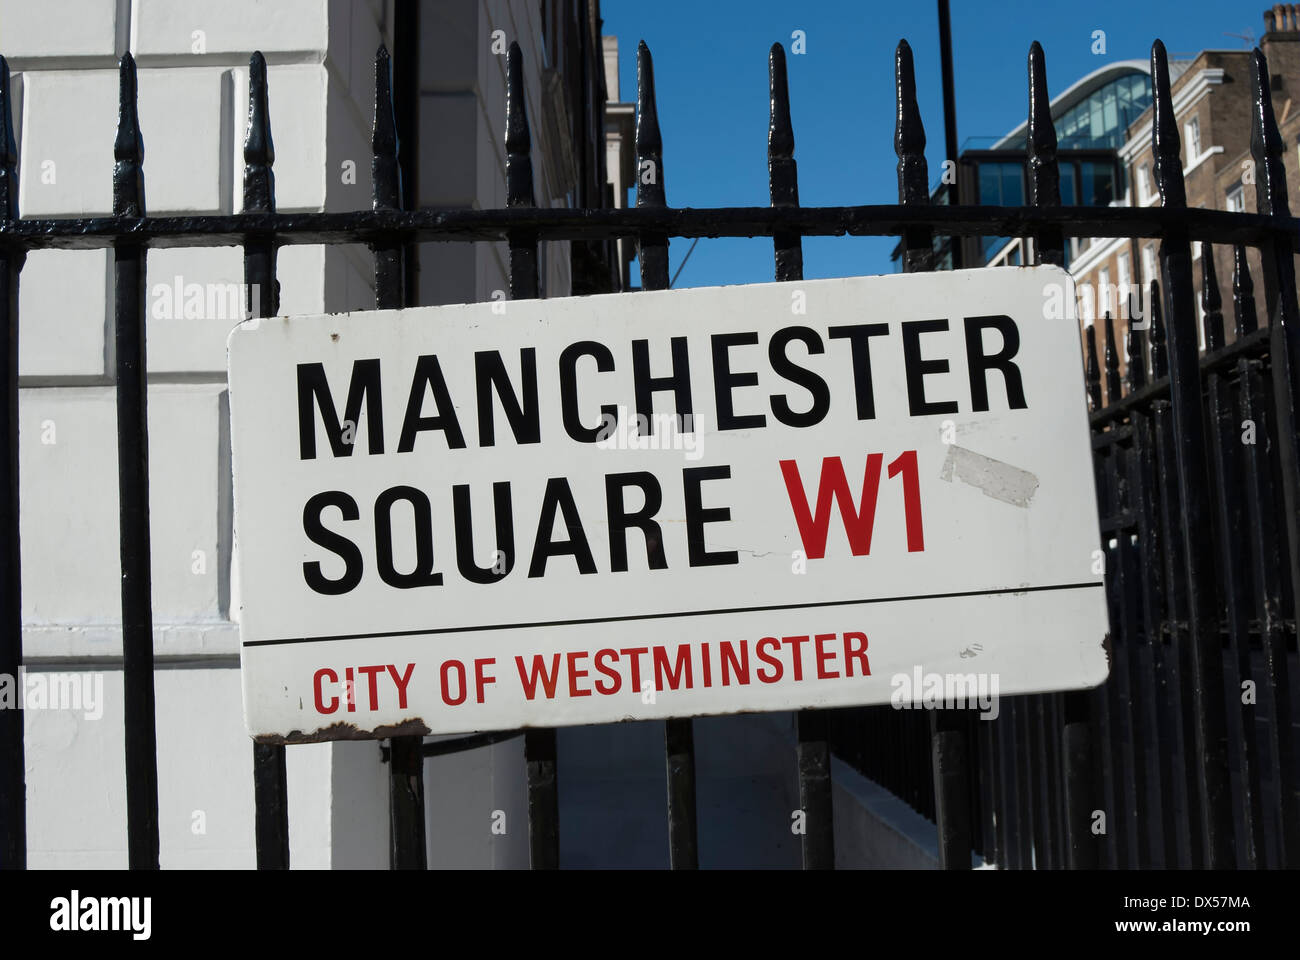 street name sign for manchester square, london, england Stock Photo